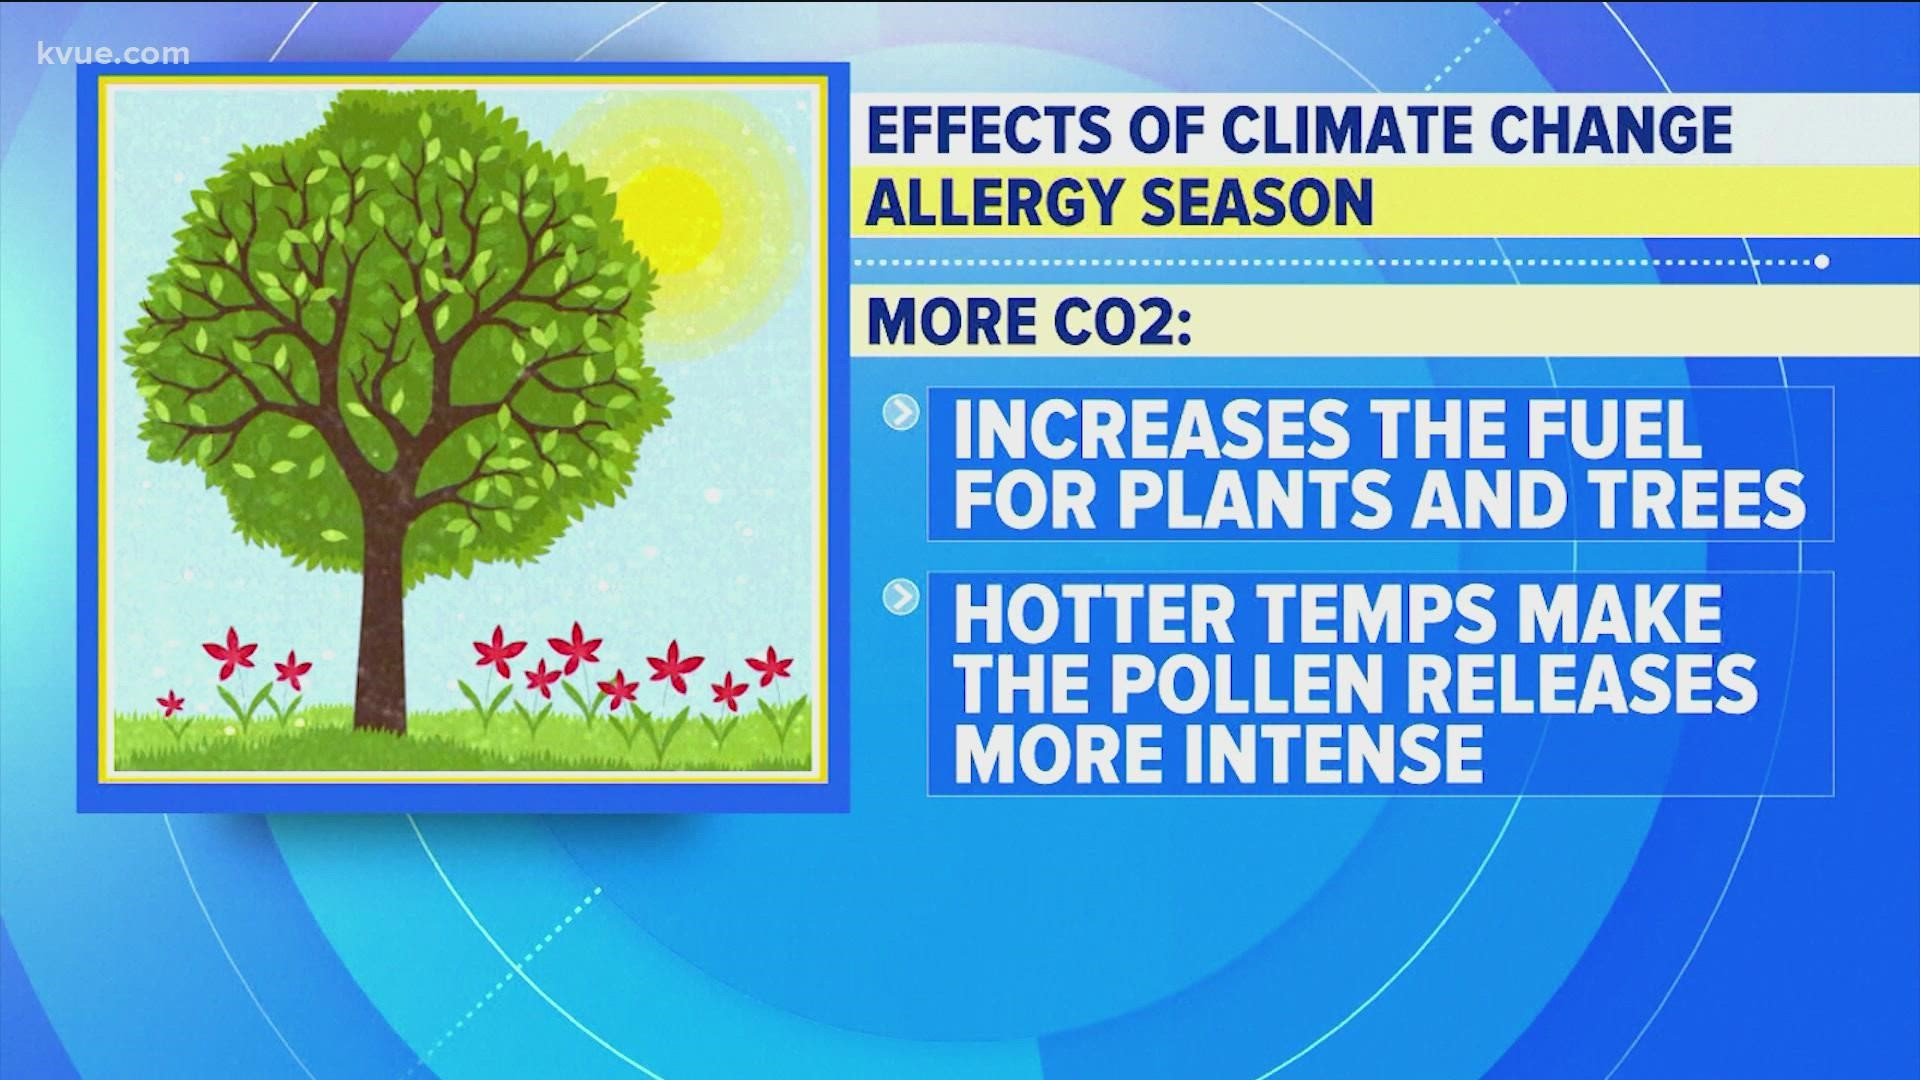 Daily allergy medications are recommended in advance of the pollen season.